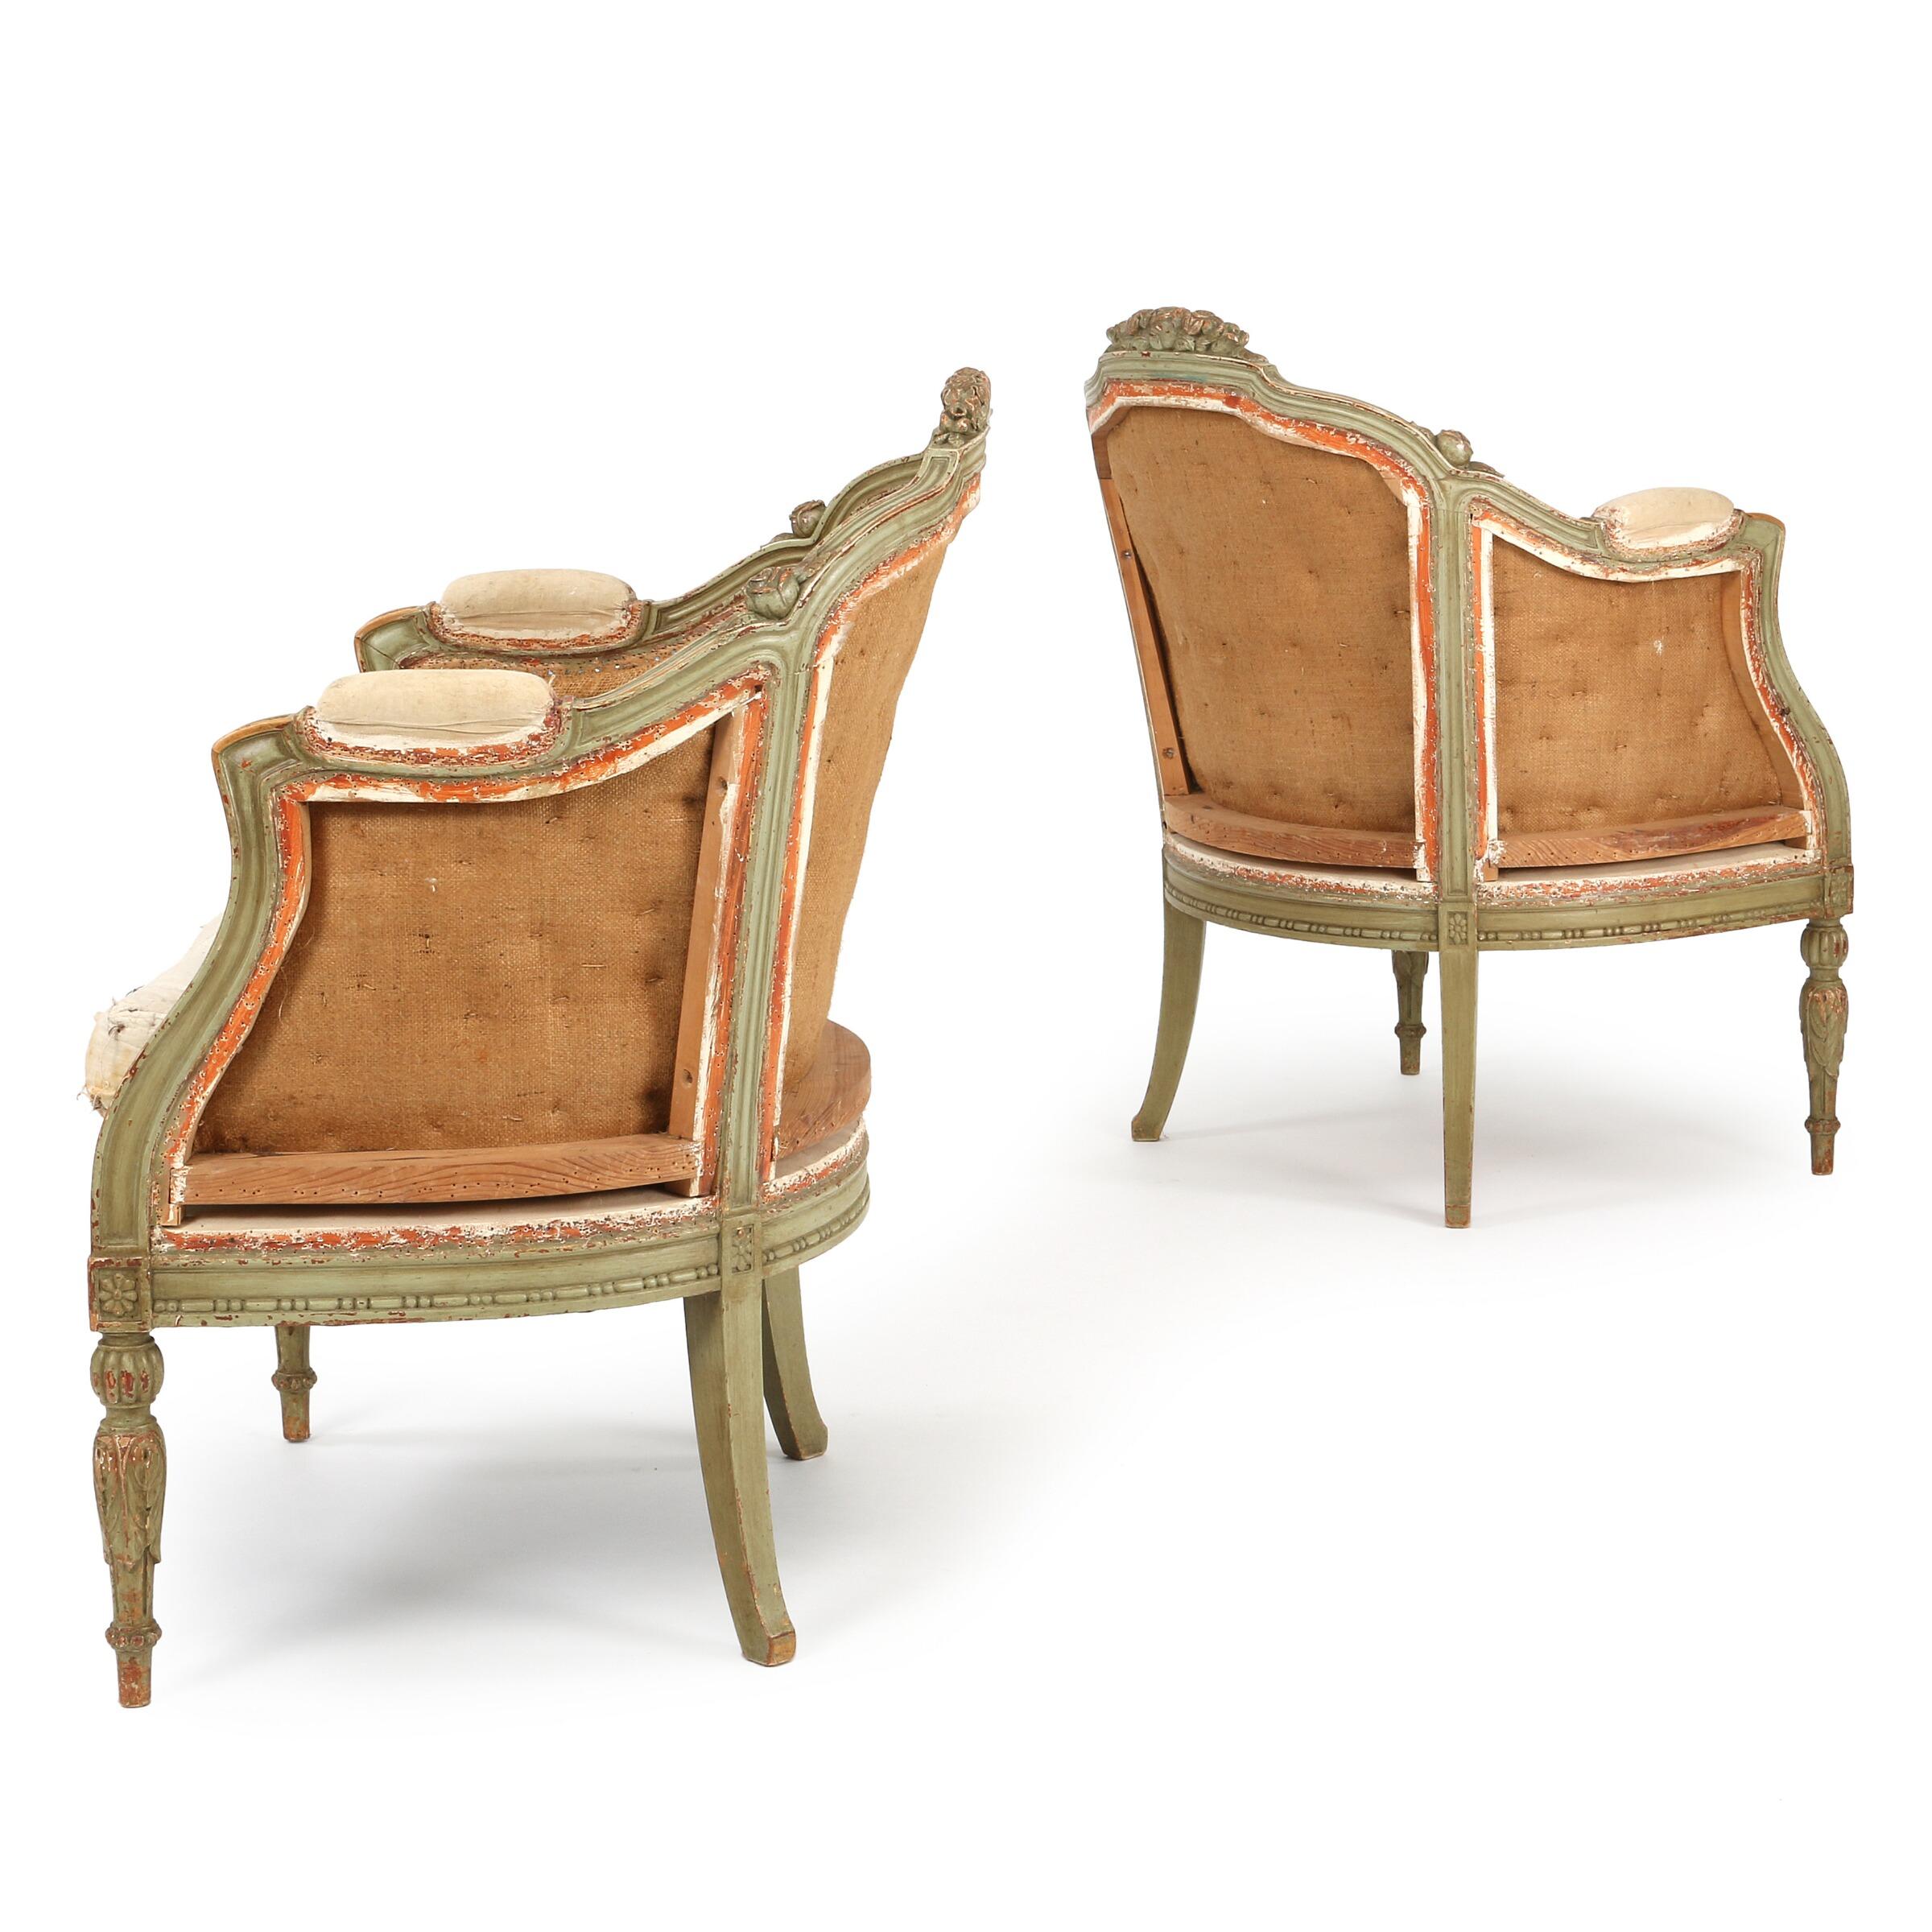 An beautiful pair of Swedish painted armchairs, in the Gustavian style, circa 1900.
Painted grey or green and antique white with gold trim, carved with rosette
decoration. Can be used as is for 'shabby chic' look or are ready for recovering.
  